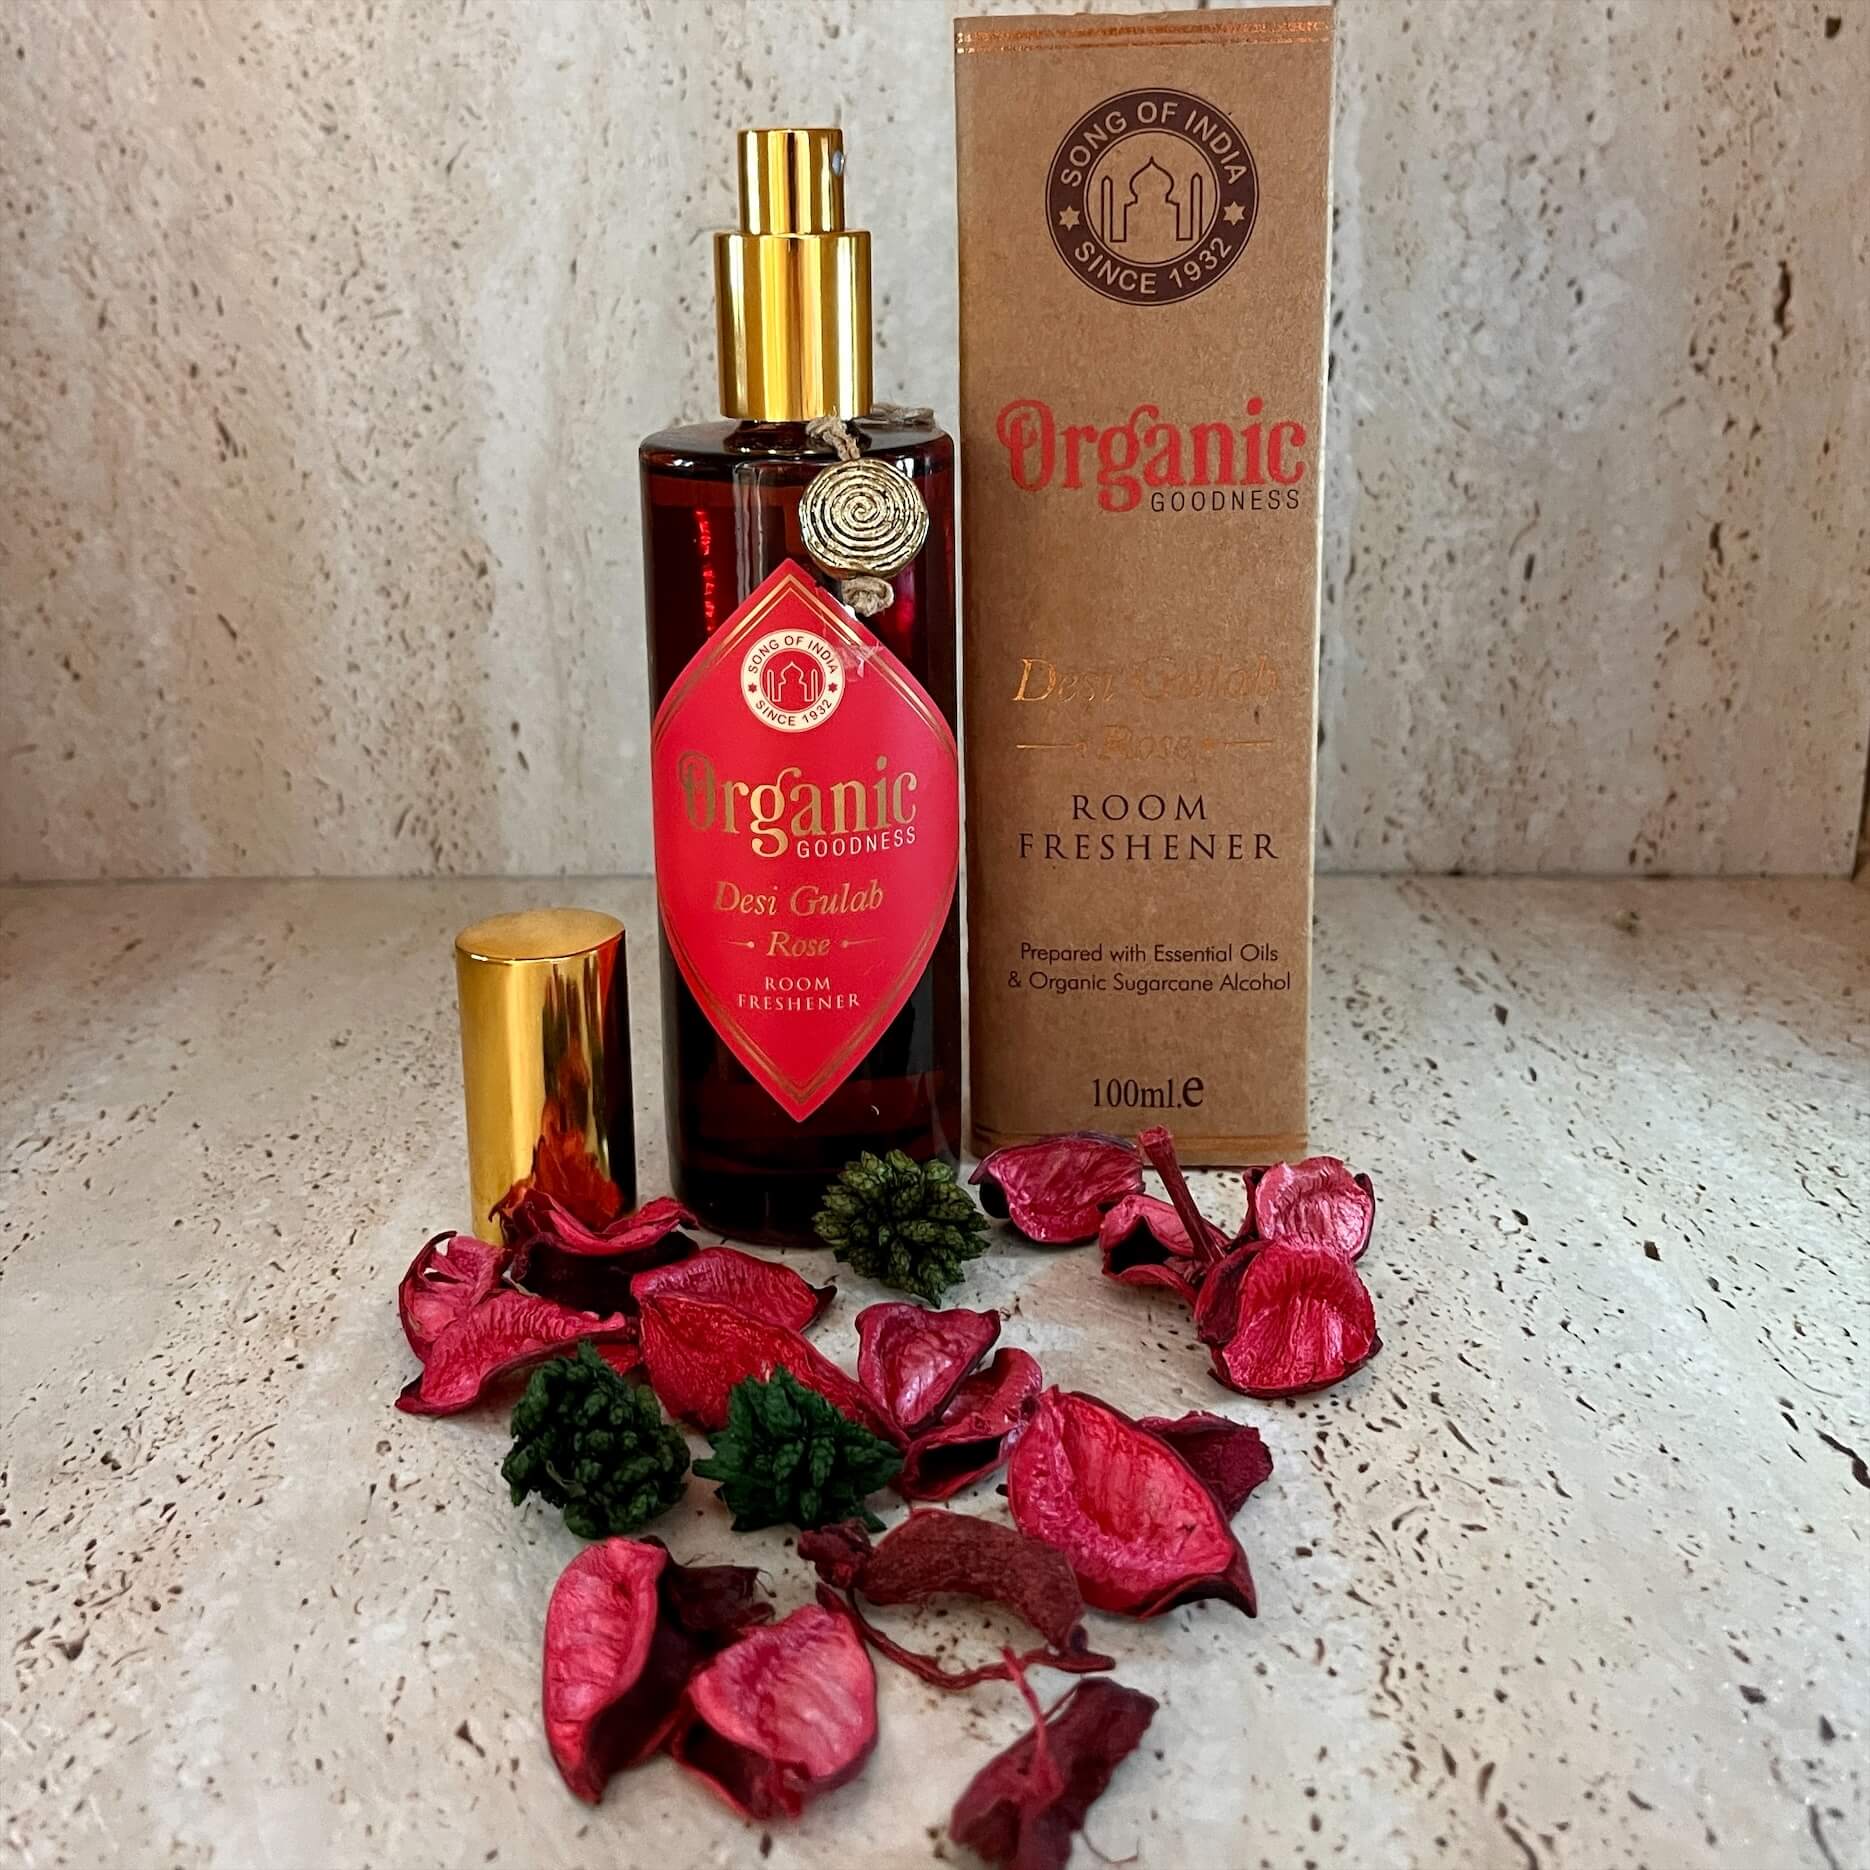 organic goodness gift set gift pack rose reed diffuser rose incense essential oil room spray rose desi gulab pack incense holder natural hand made special buy sale